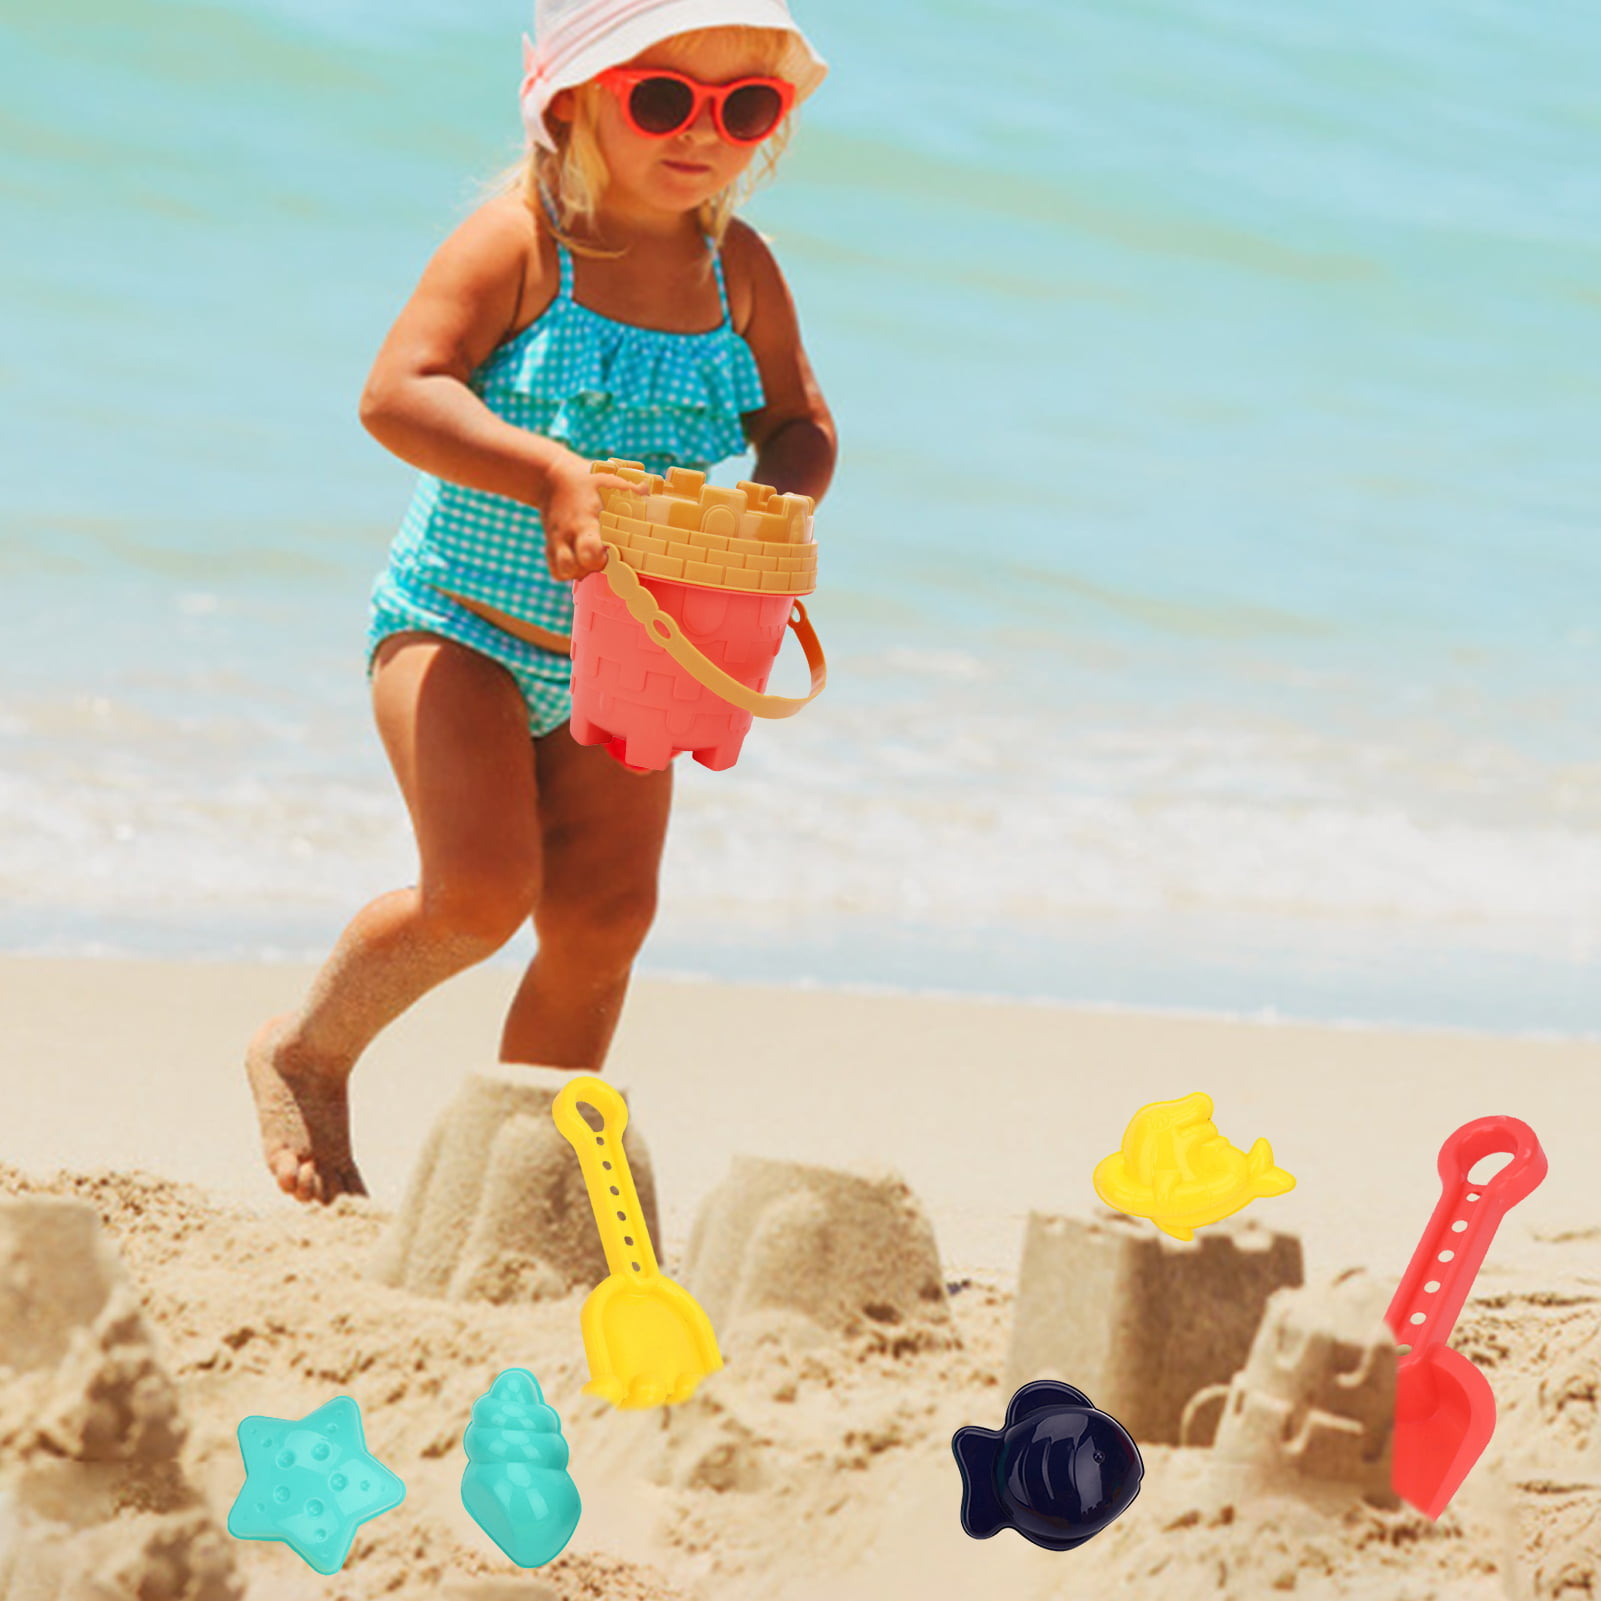 12 x Sand Windmills Ideal for Sandpits or the Beach Sand Castles 15cm In Height 